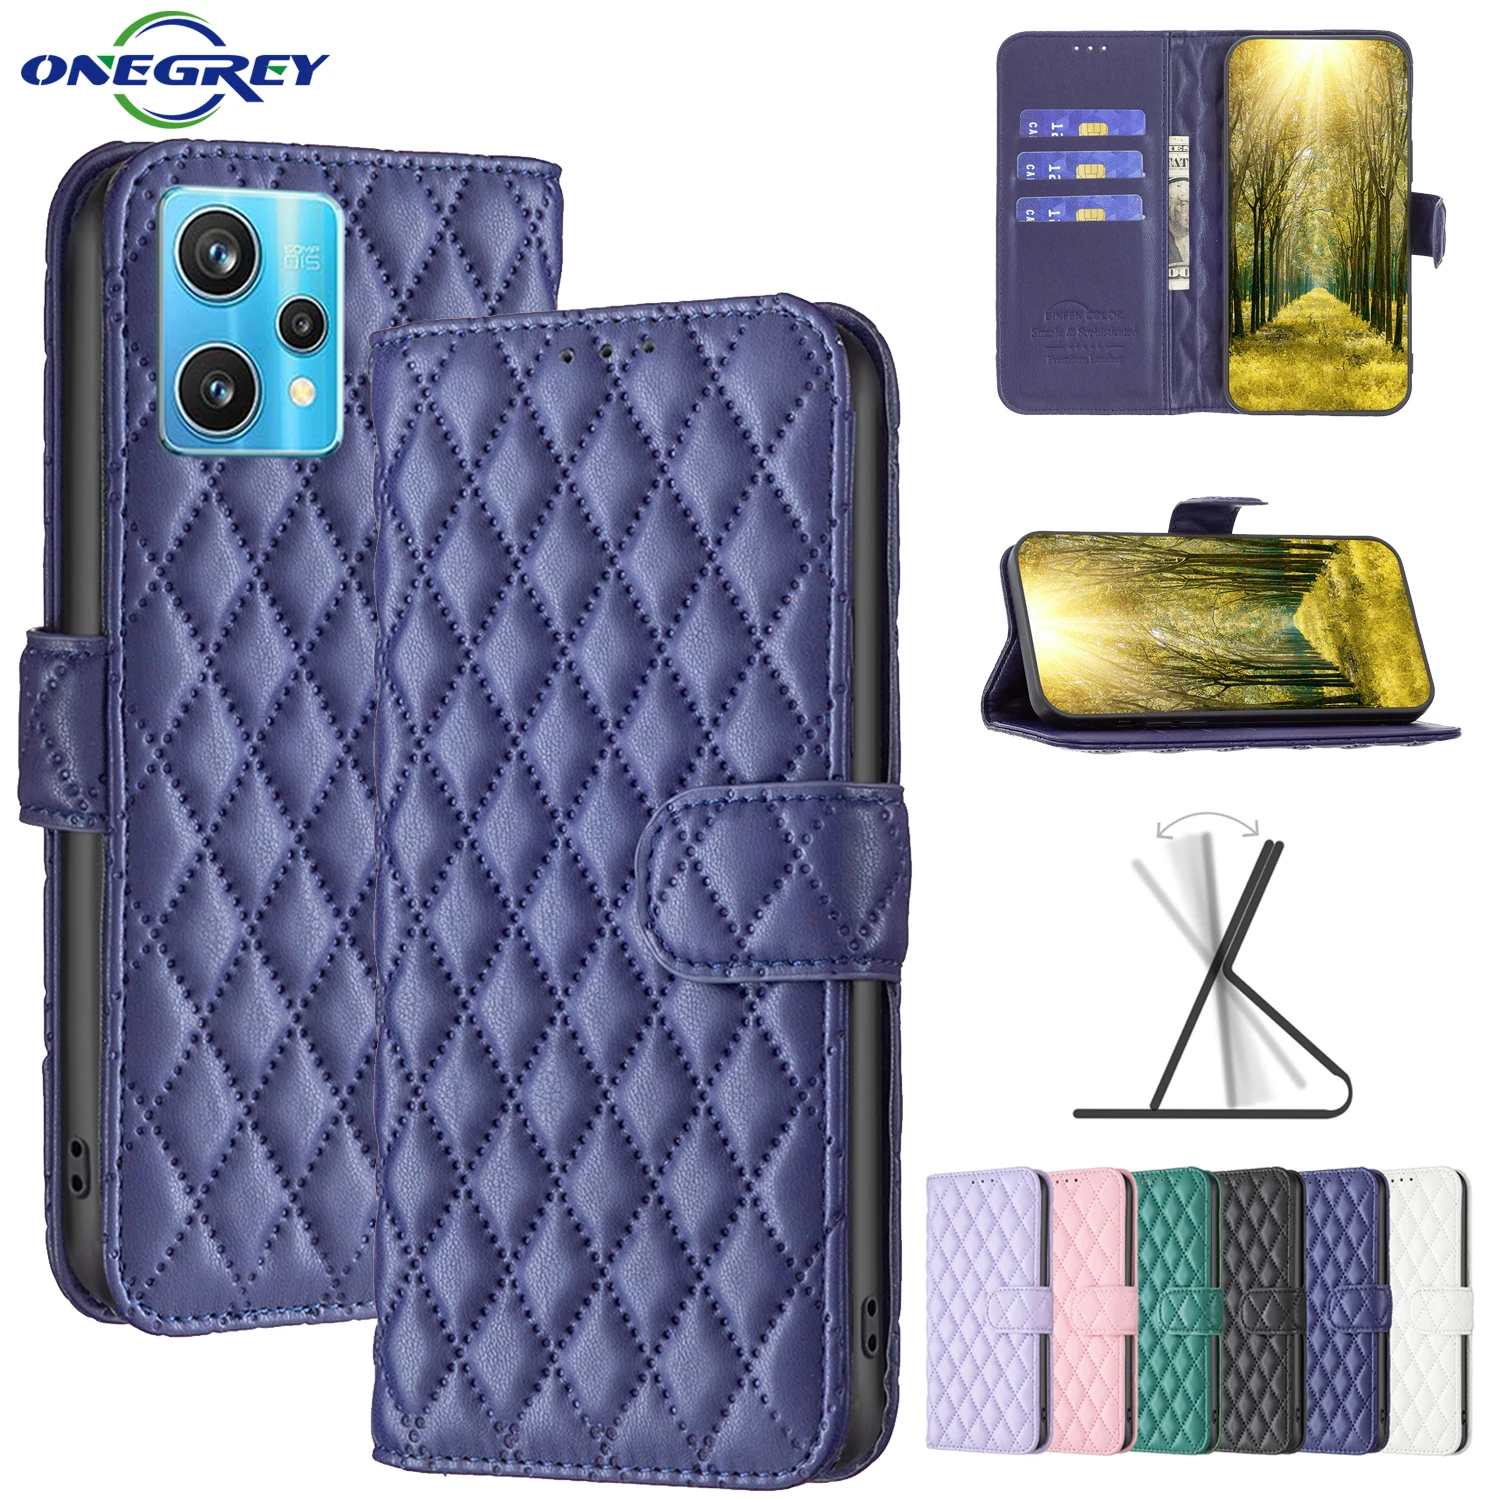 

Shockproof Luxury Case For OPPO Realme C35 C31 C21 C20 C12 C25 Reno 7 Find X5 Pro Wallet Card Flip Leather Strong Magnetic Cover